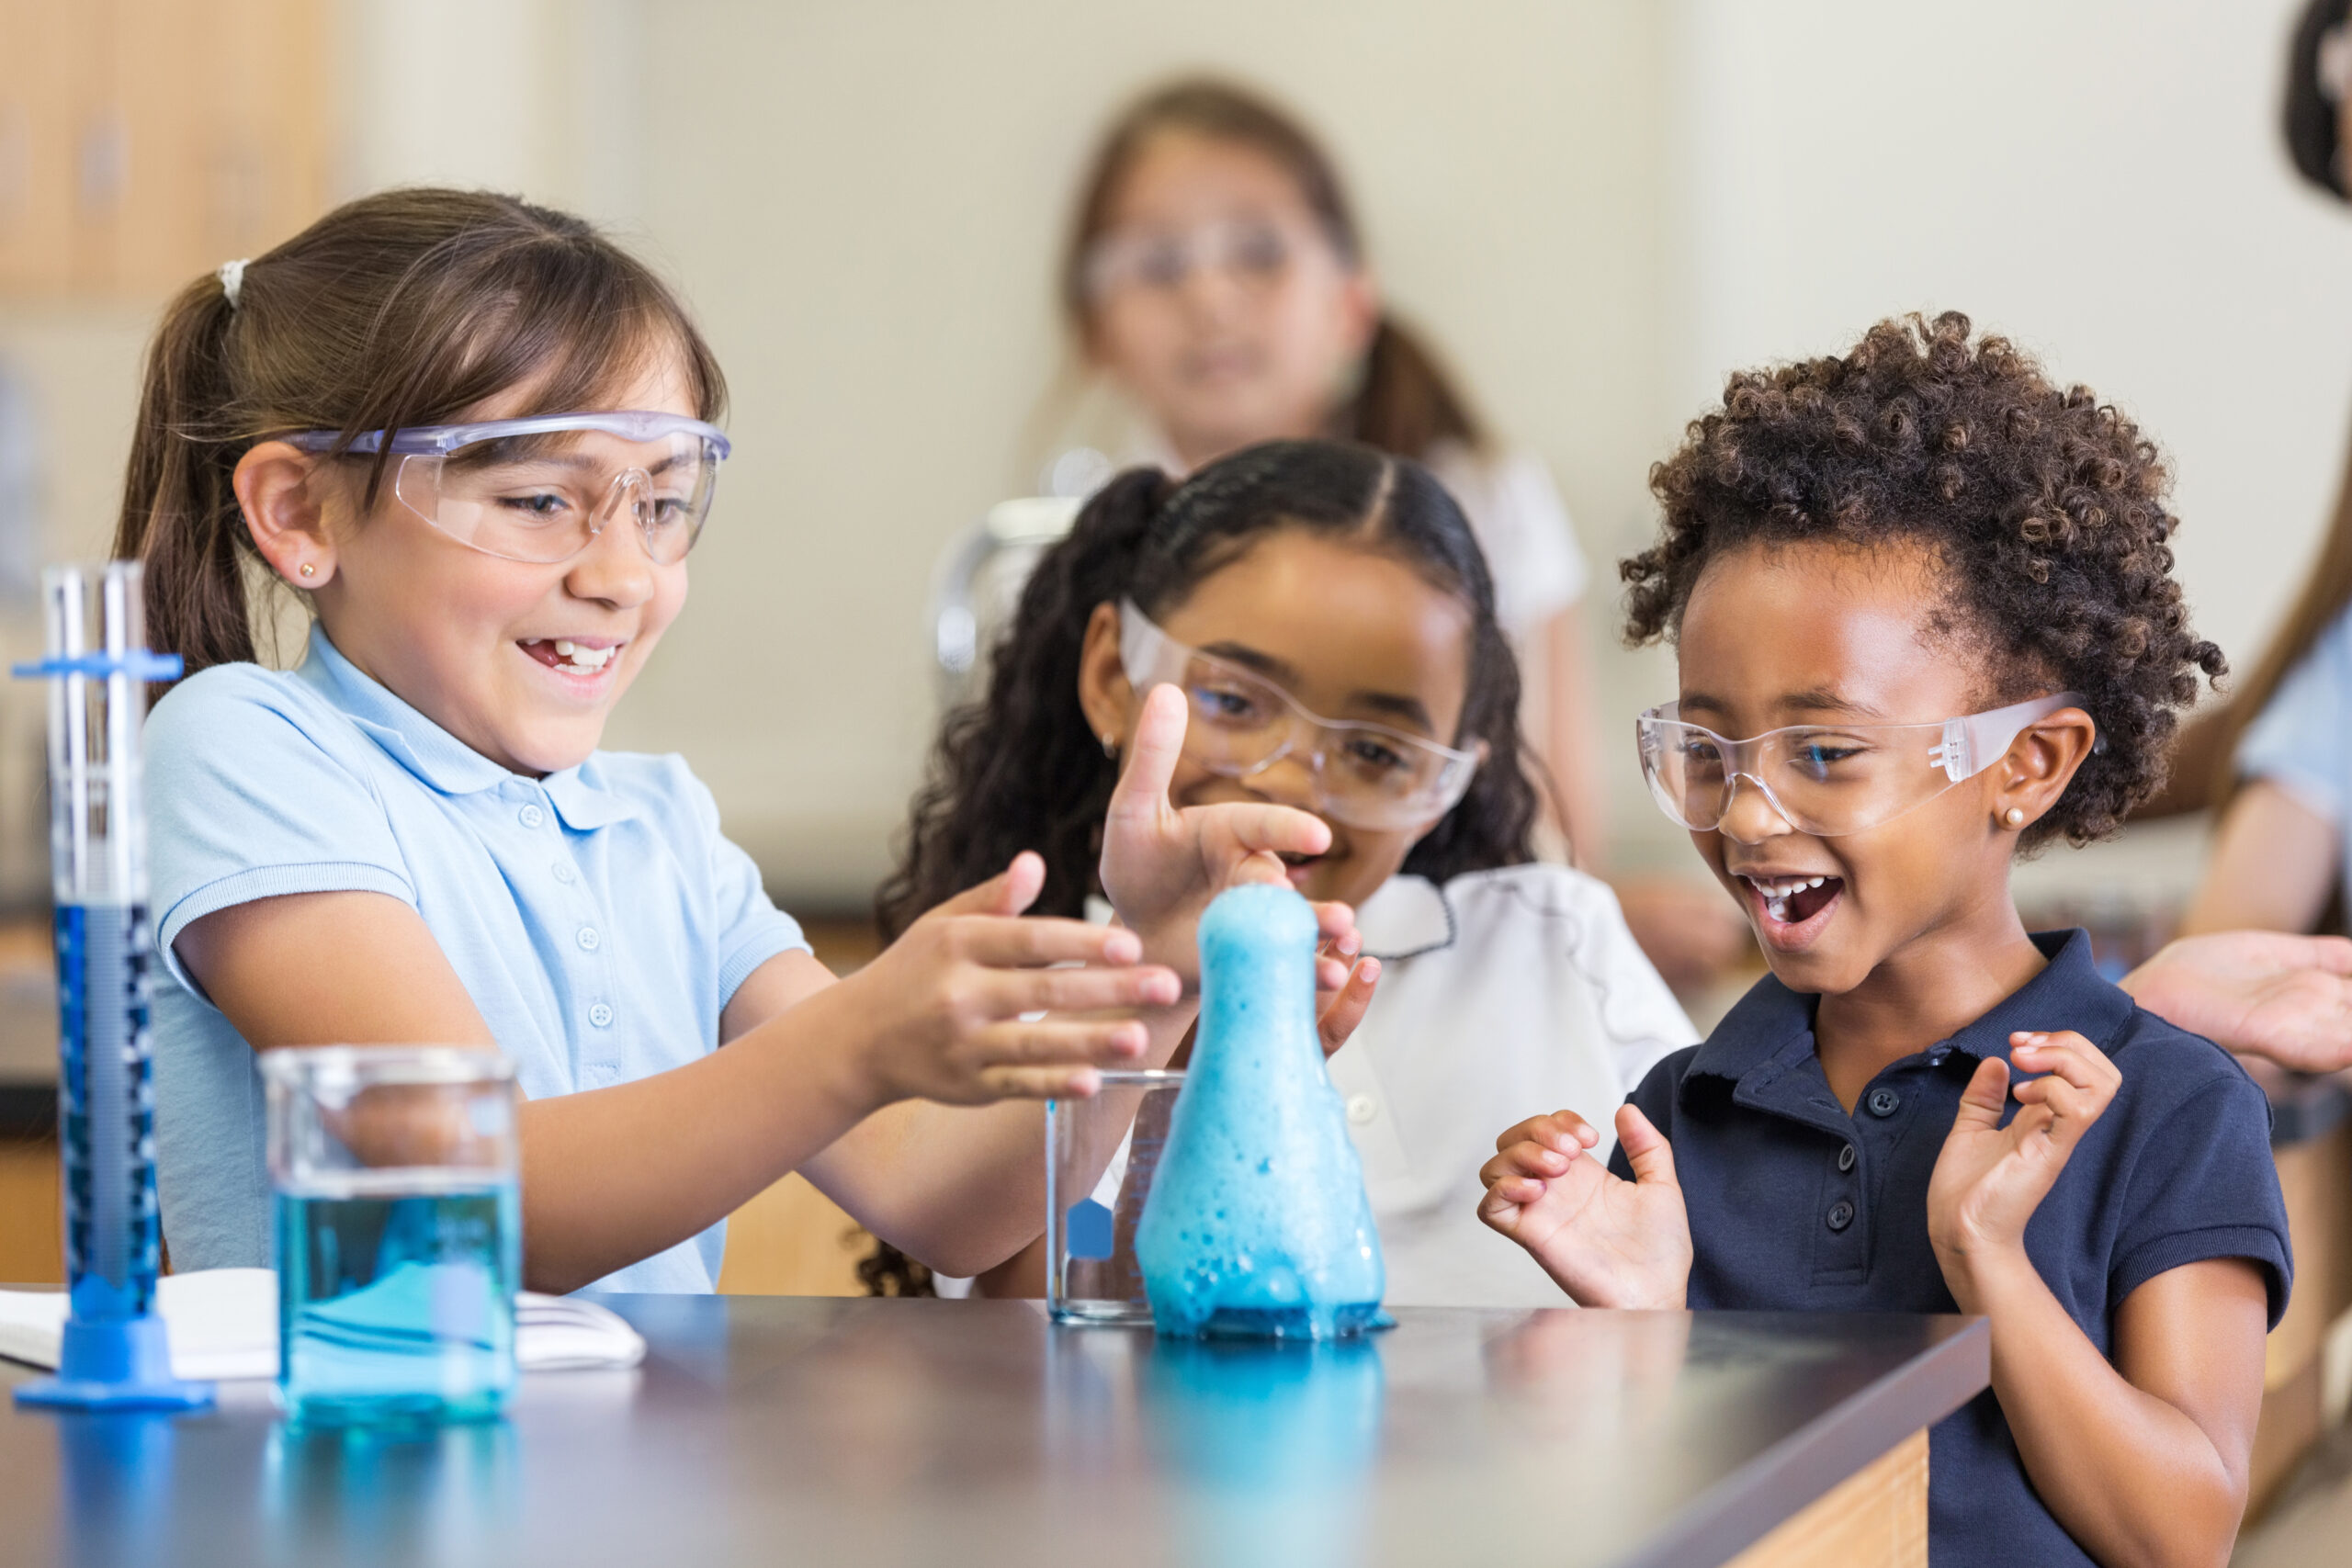 Let's talk about the "Matilda Effect" in STEM